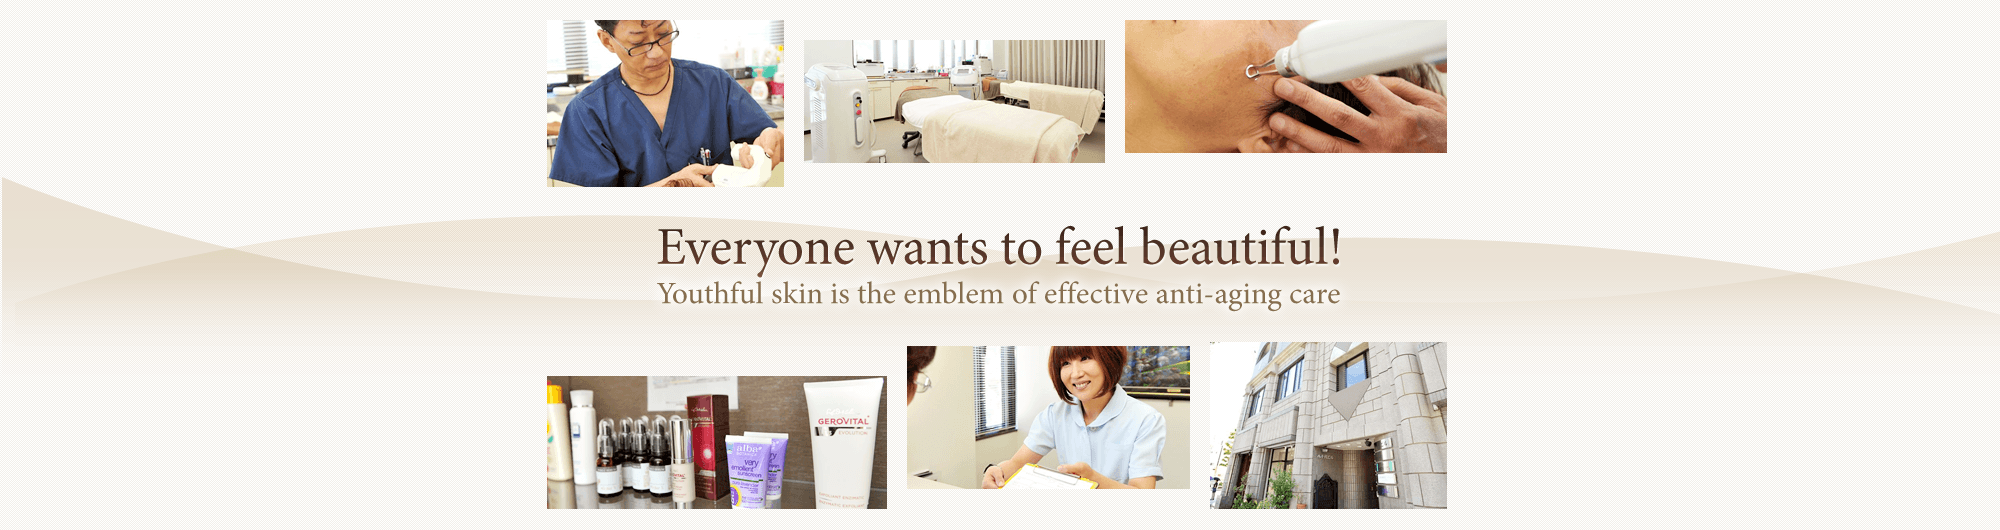 Everyone wants to feel beautiful!Youthful skin is the emblem of effective anti-aging care
